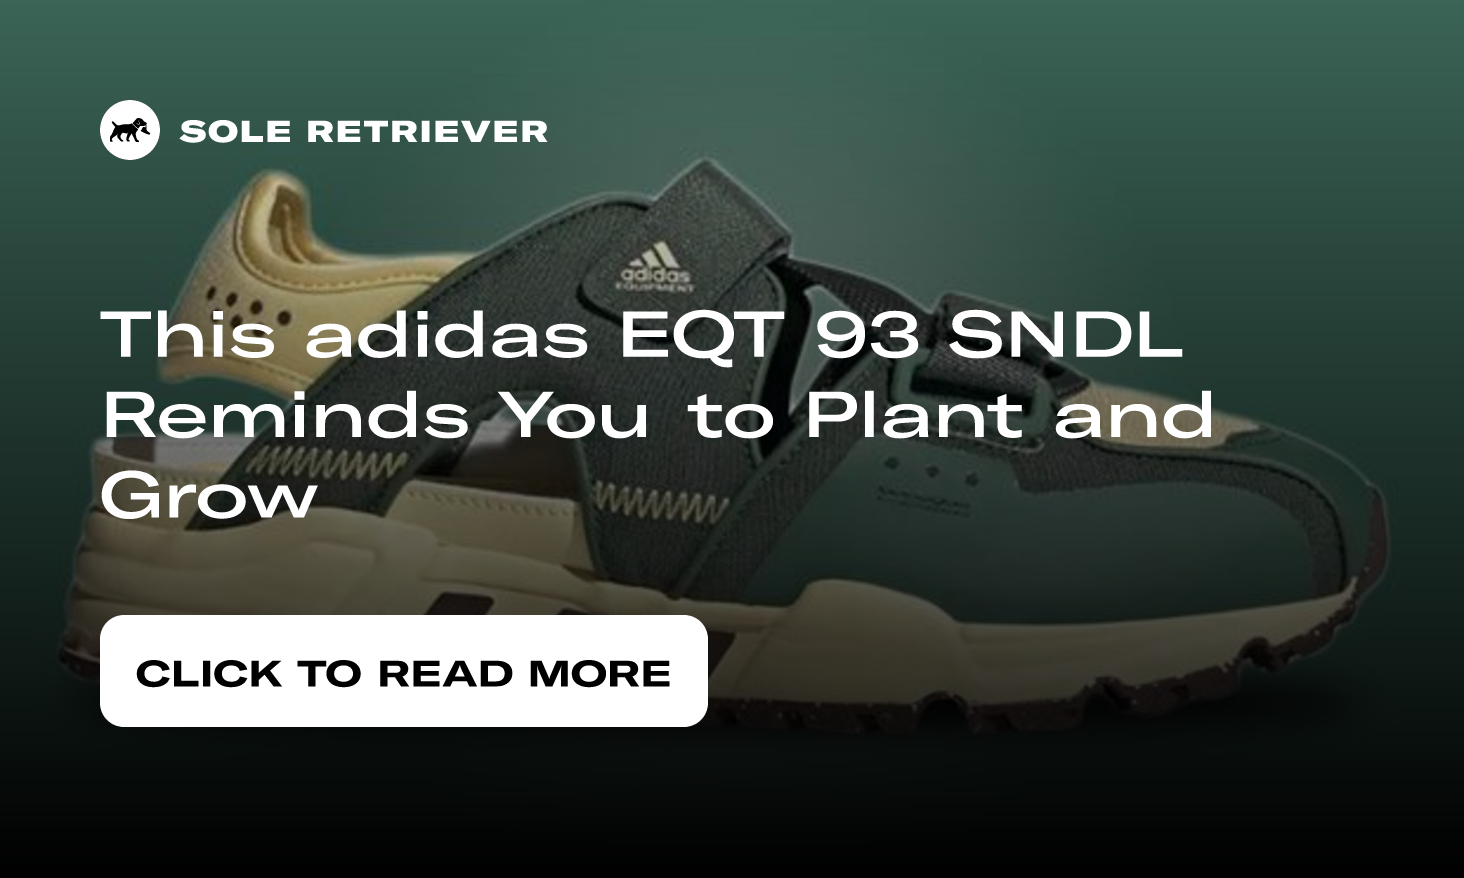 This adidas EQT 93 SNDL Reminds You to Plant and Grow